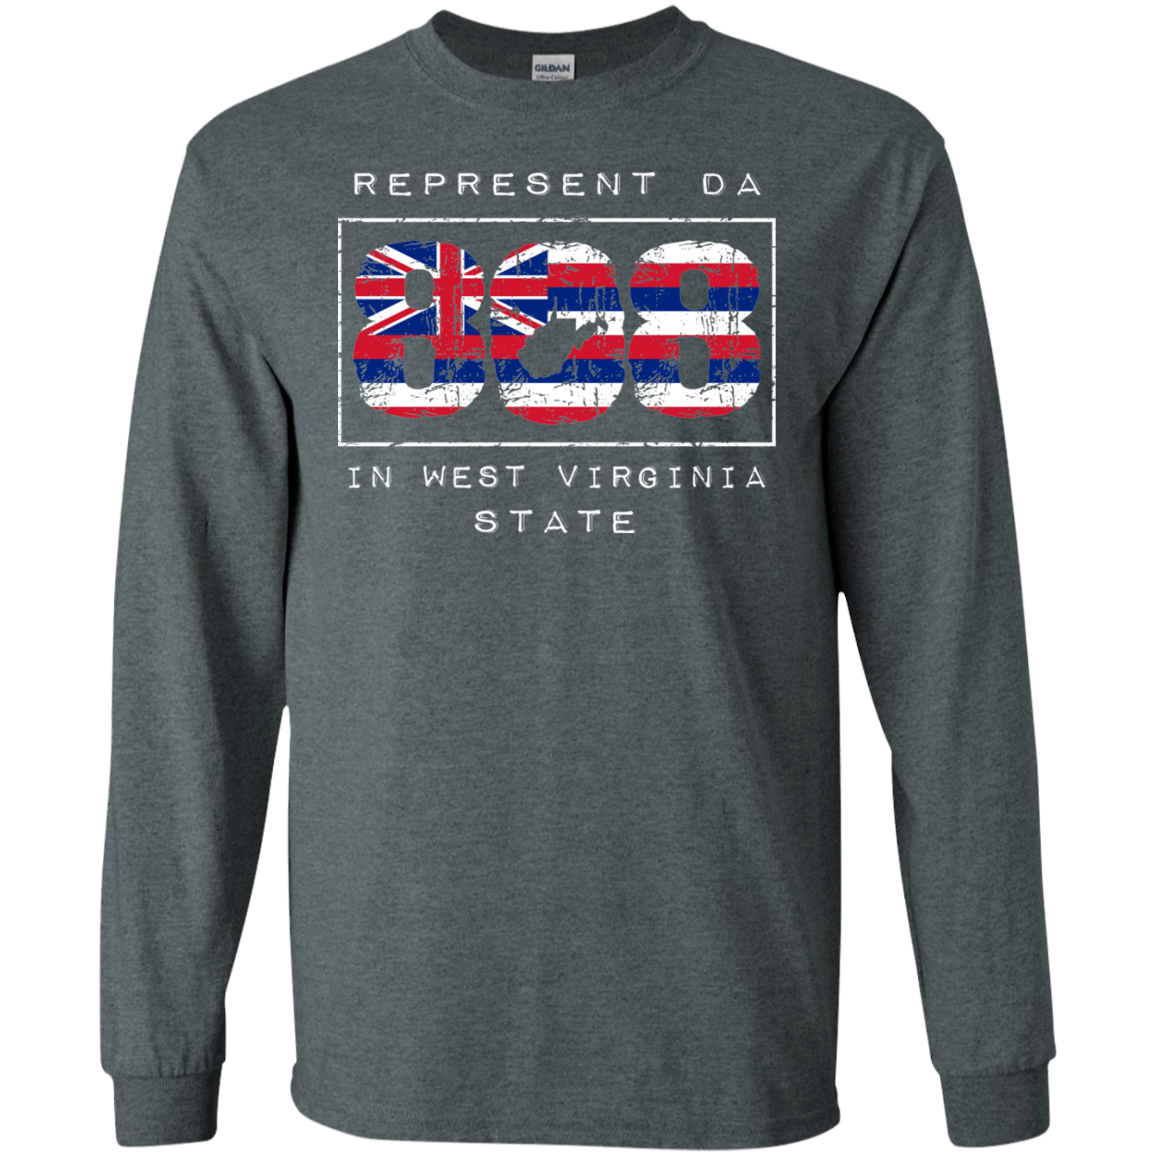 Rep Da 808 In West Virginia State LS Ultra Cotton T-Shirt, T-Shirts, Hawaii Nei All Day